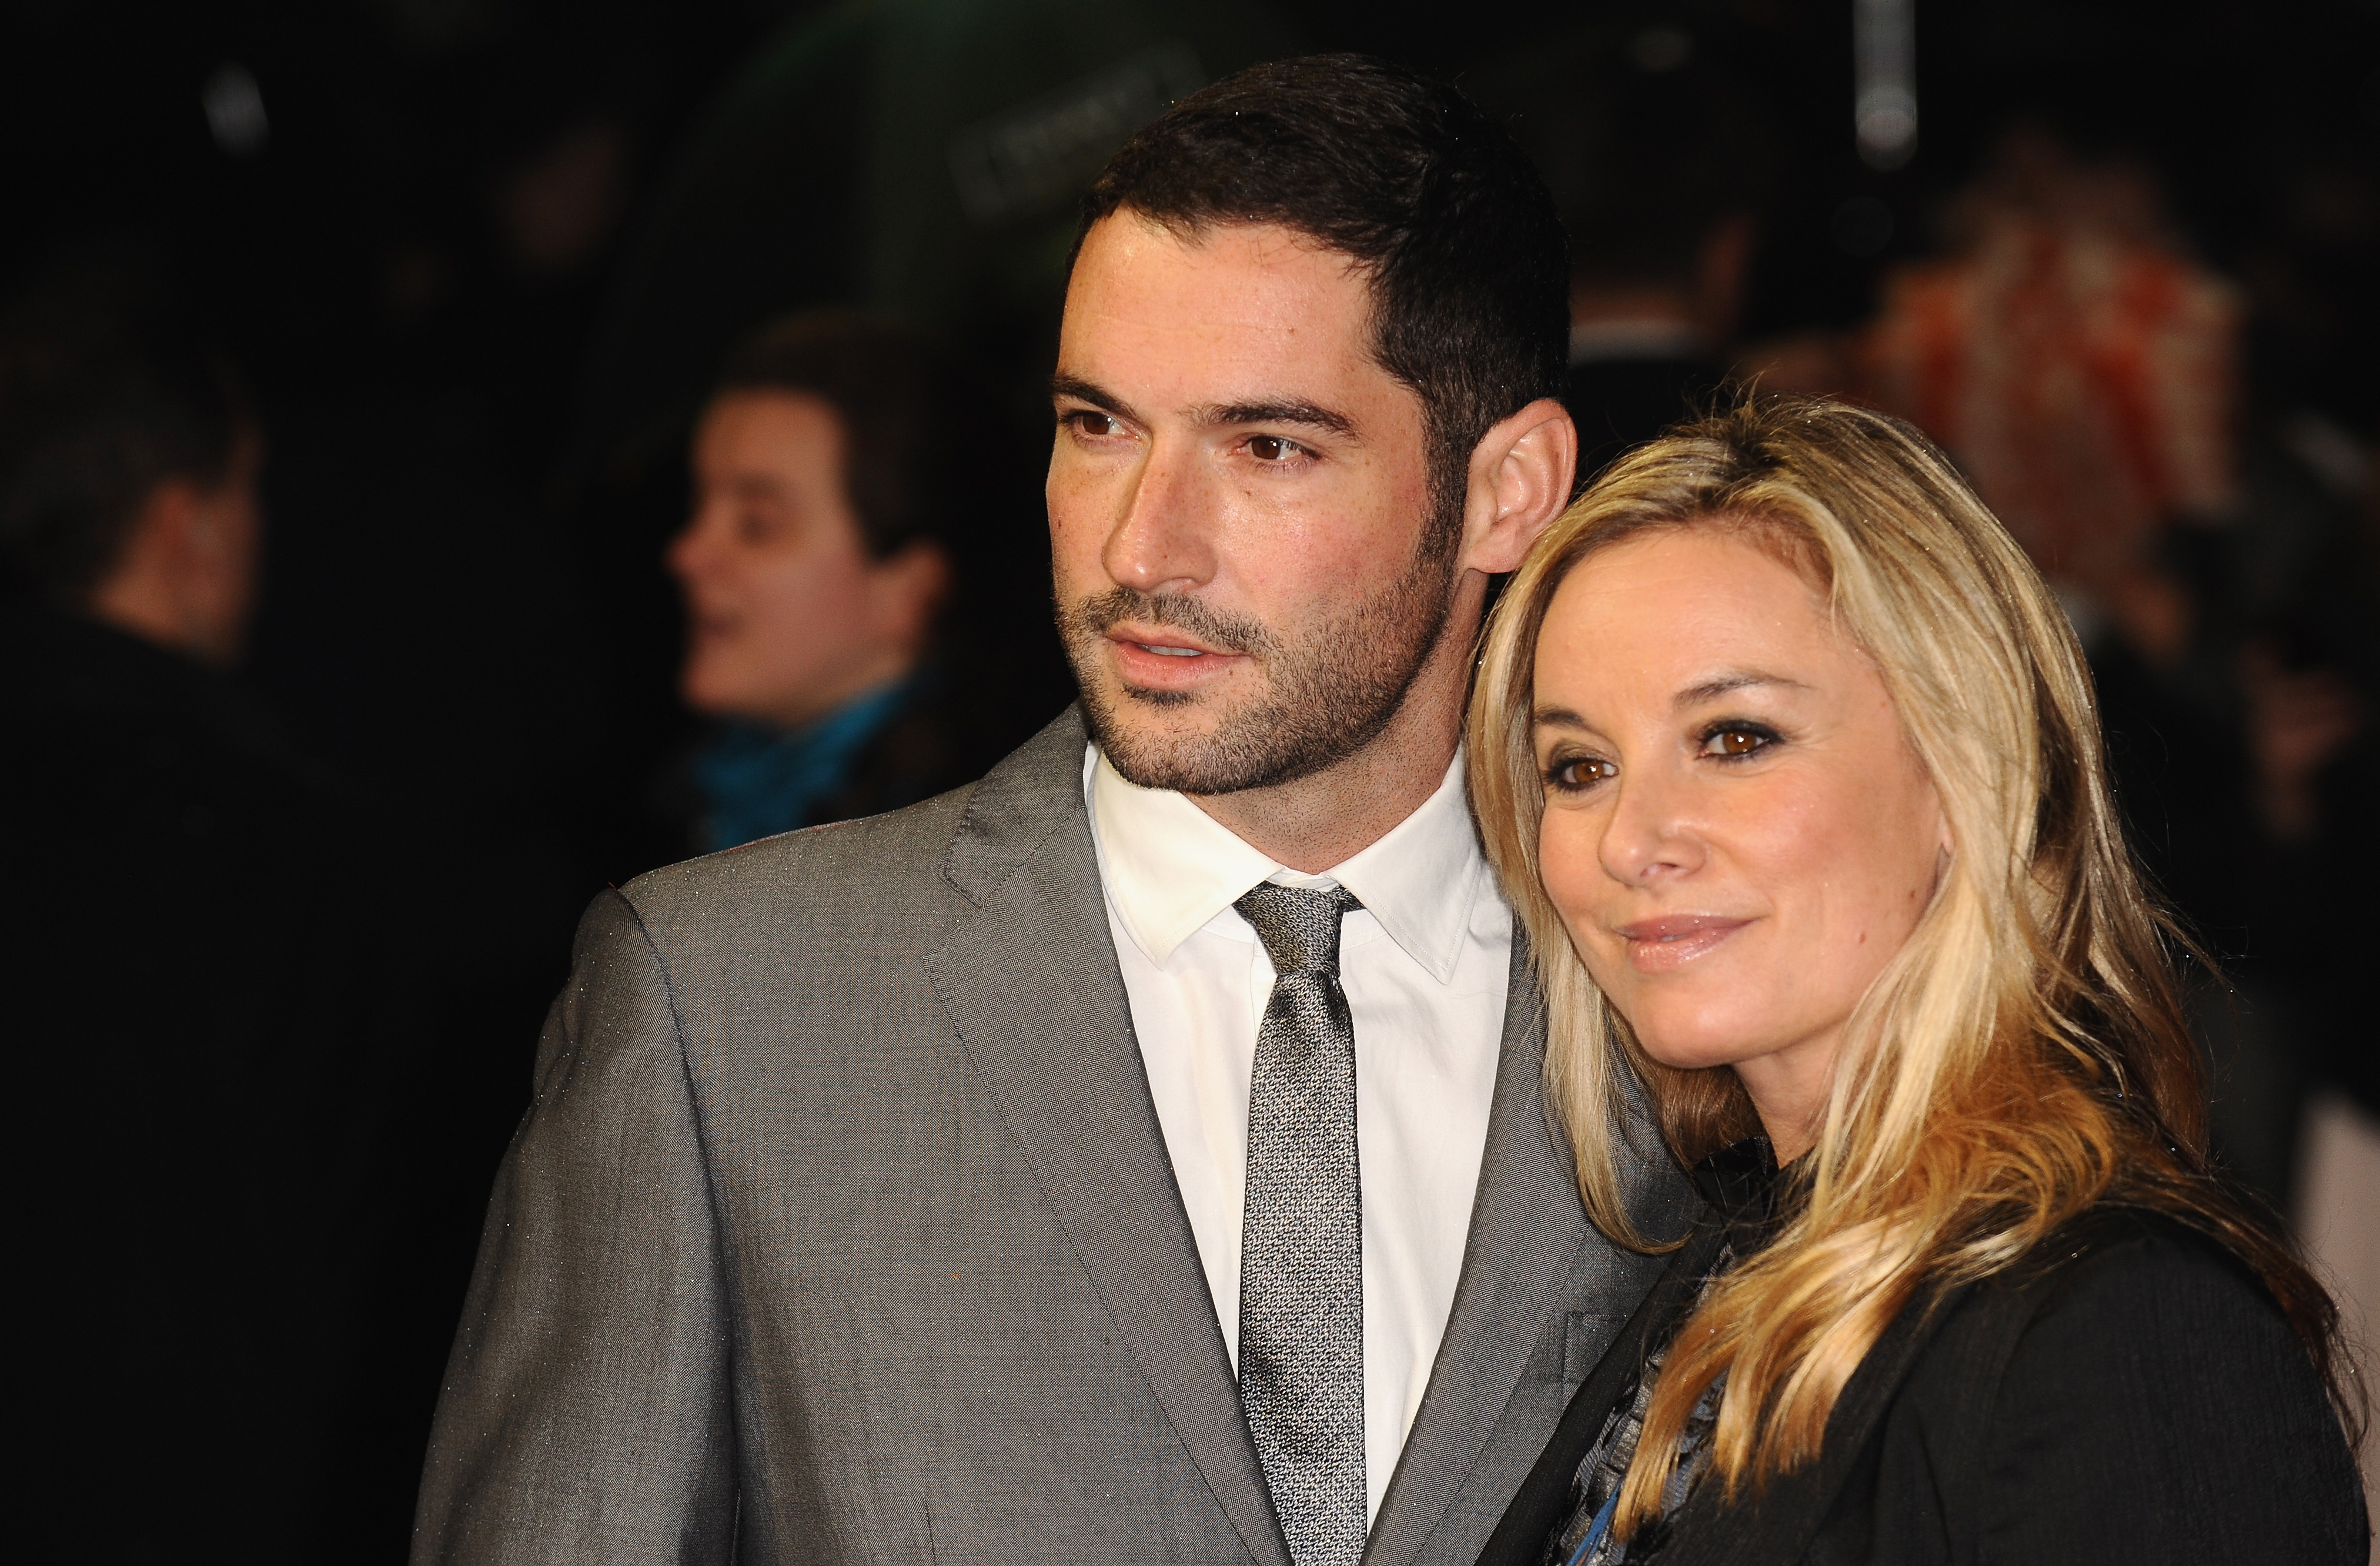 Tom Ellis and Tamzin Outhwaite at he premiere of 'Great Expectations' at Odeon Leicester Square, on October 21, 2012 in London, England. | Source: Getty Images